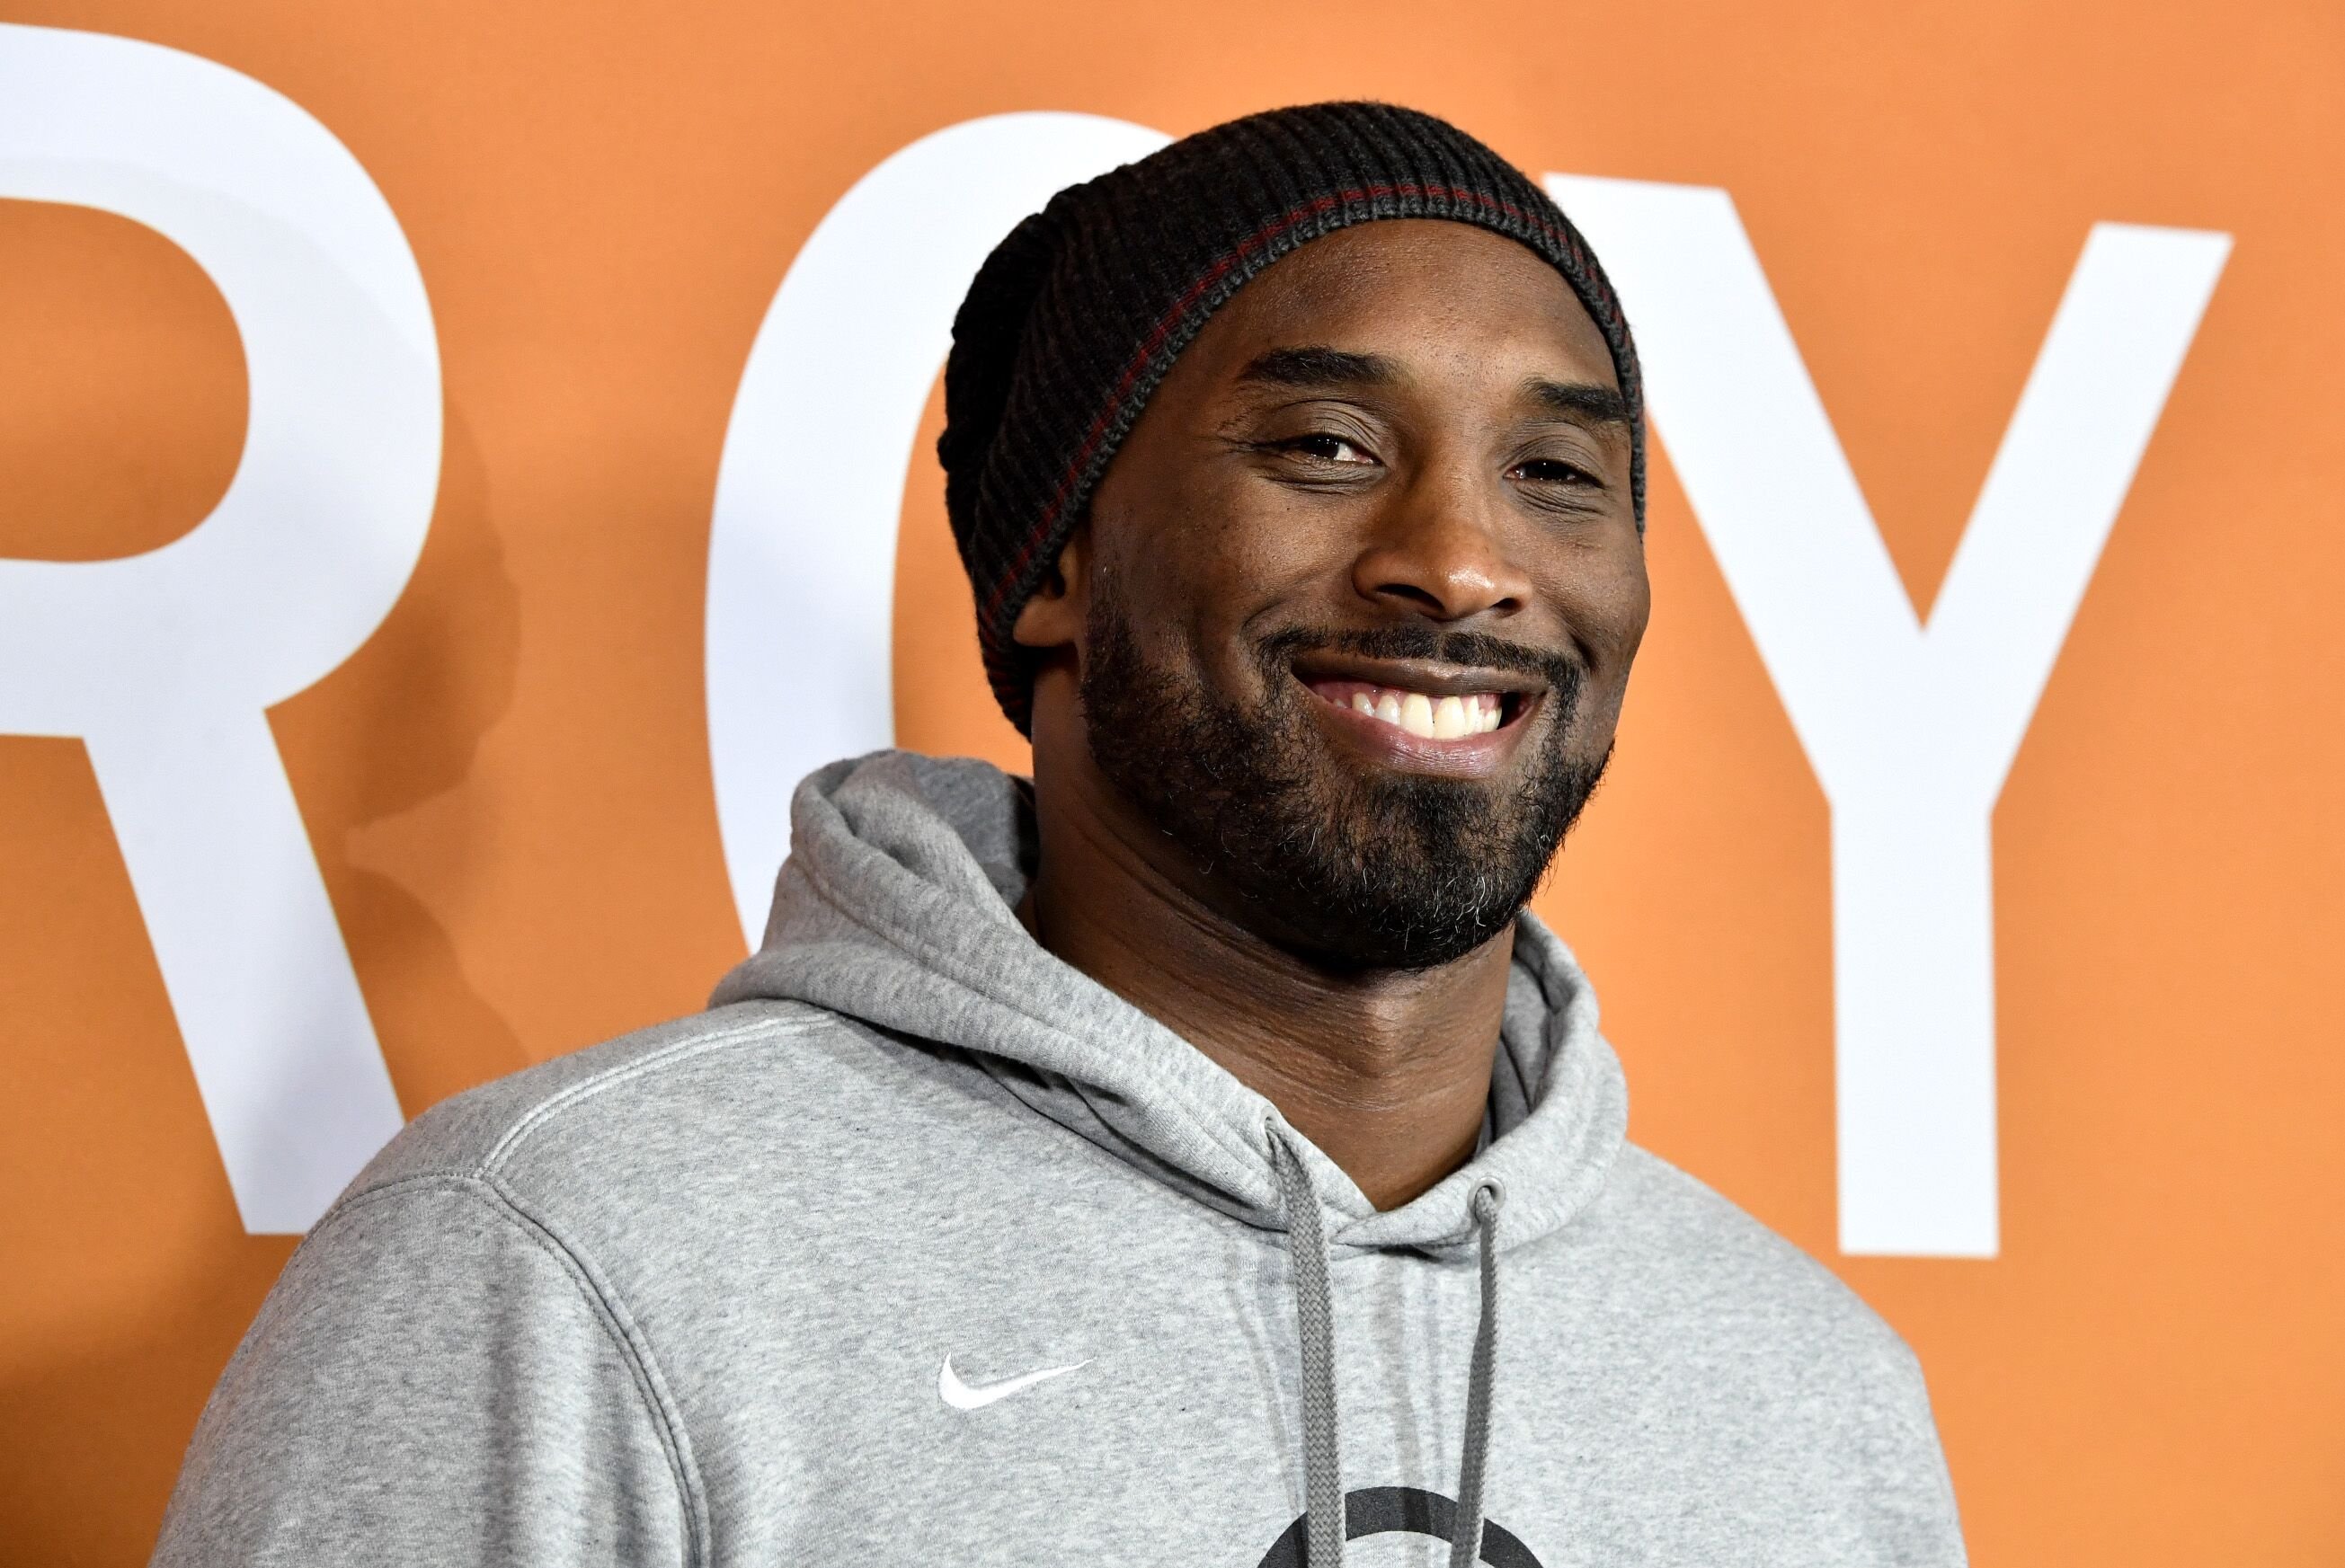 Kobe Bryant attends the LA Community Screening Of Warner Bros Pictures' "Just Mercy" at Cinemark Baldwin Hills in Los Angeles, California | Photo: Getty Images